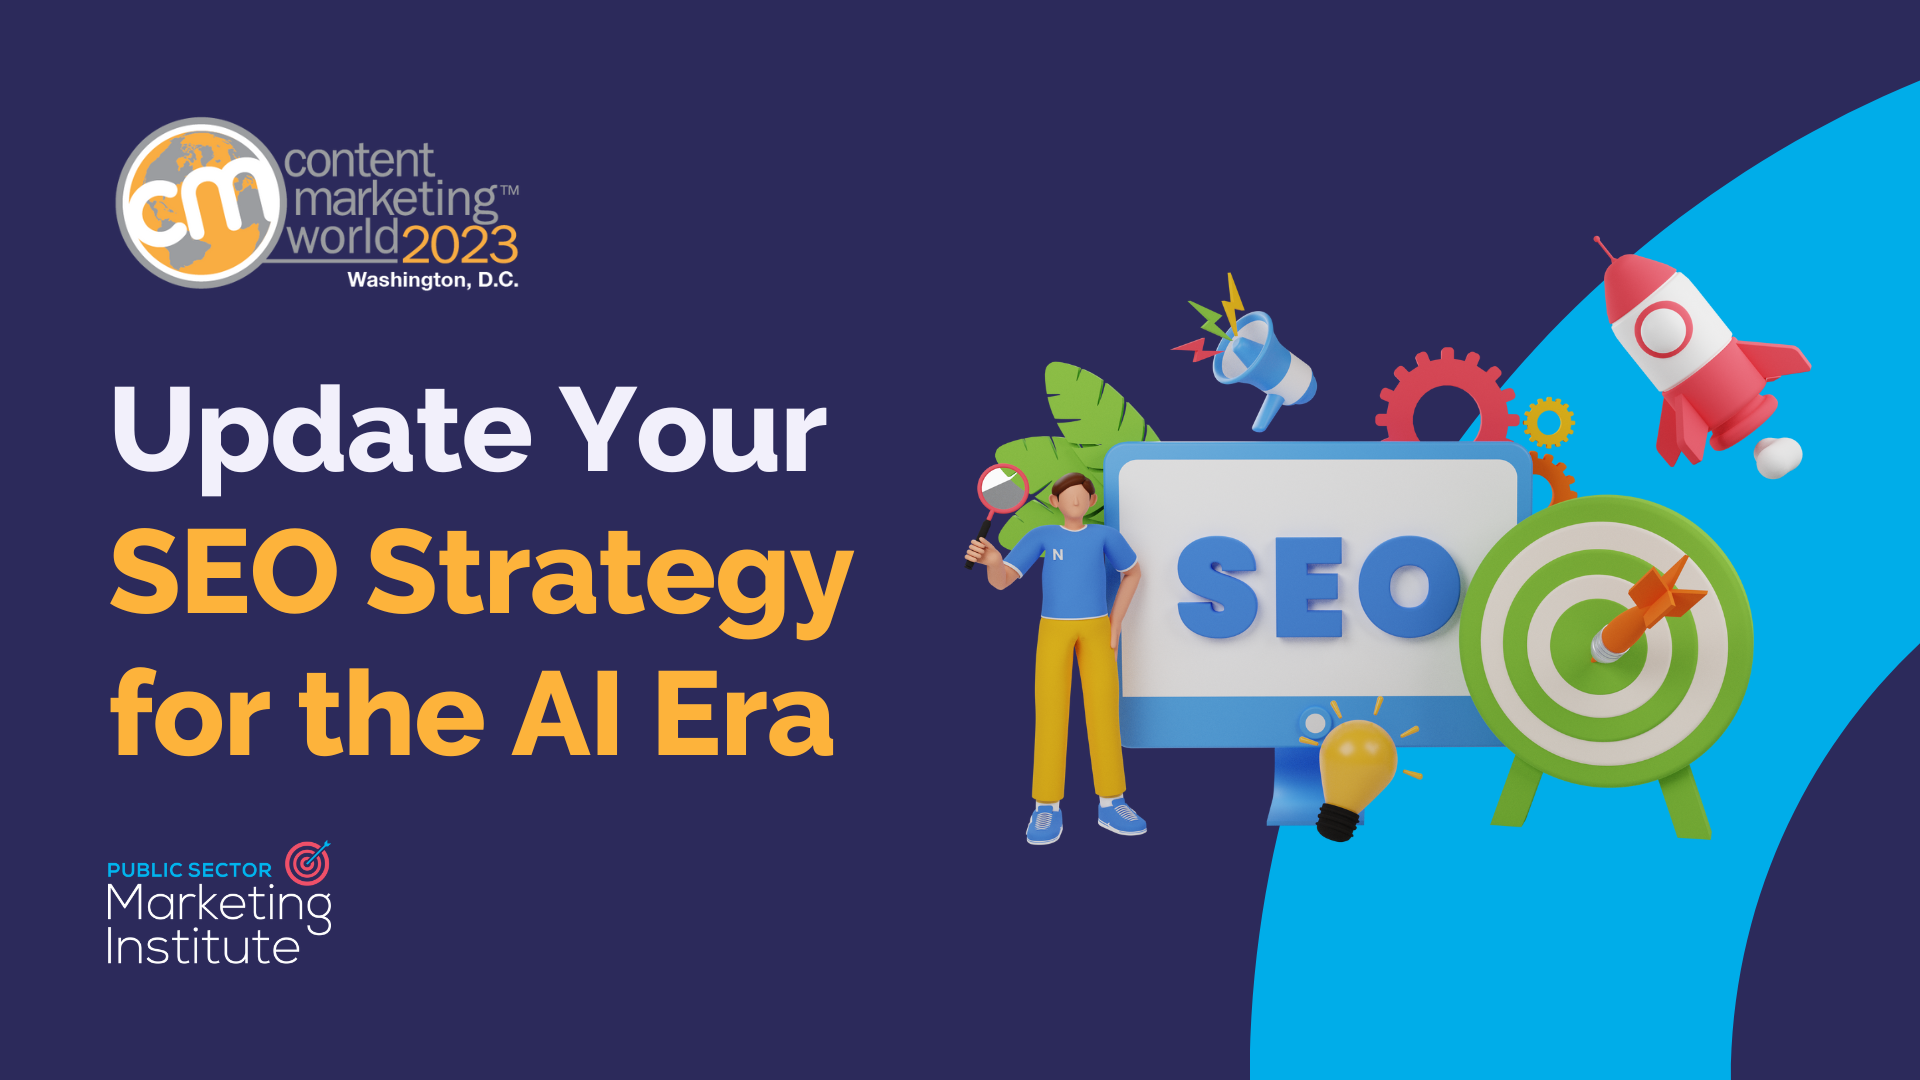 Update Your SEO Strategy for the AI Era